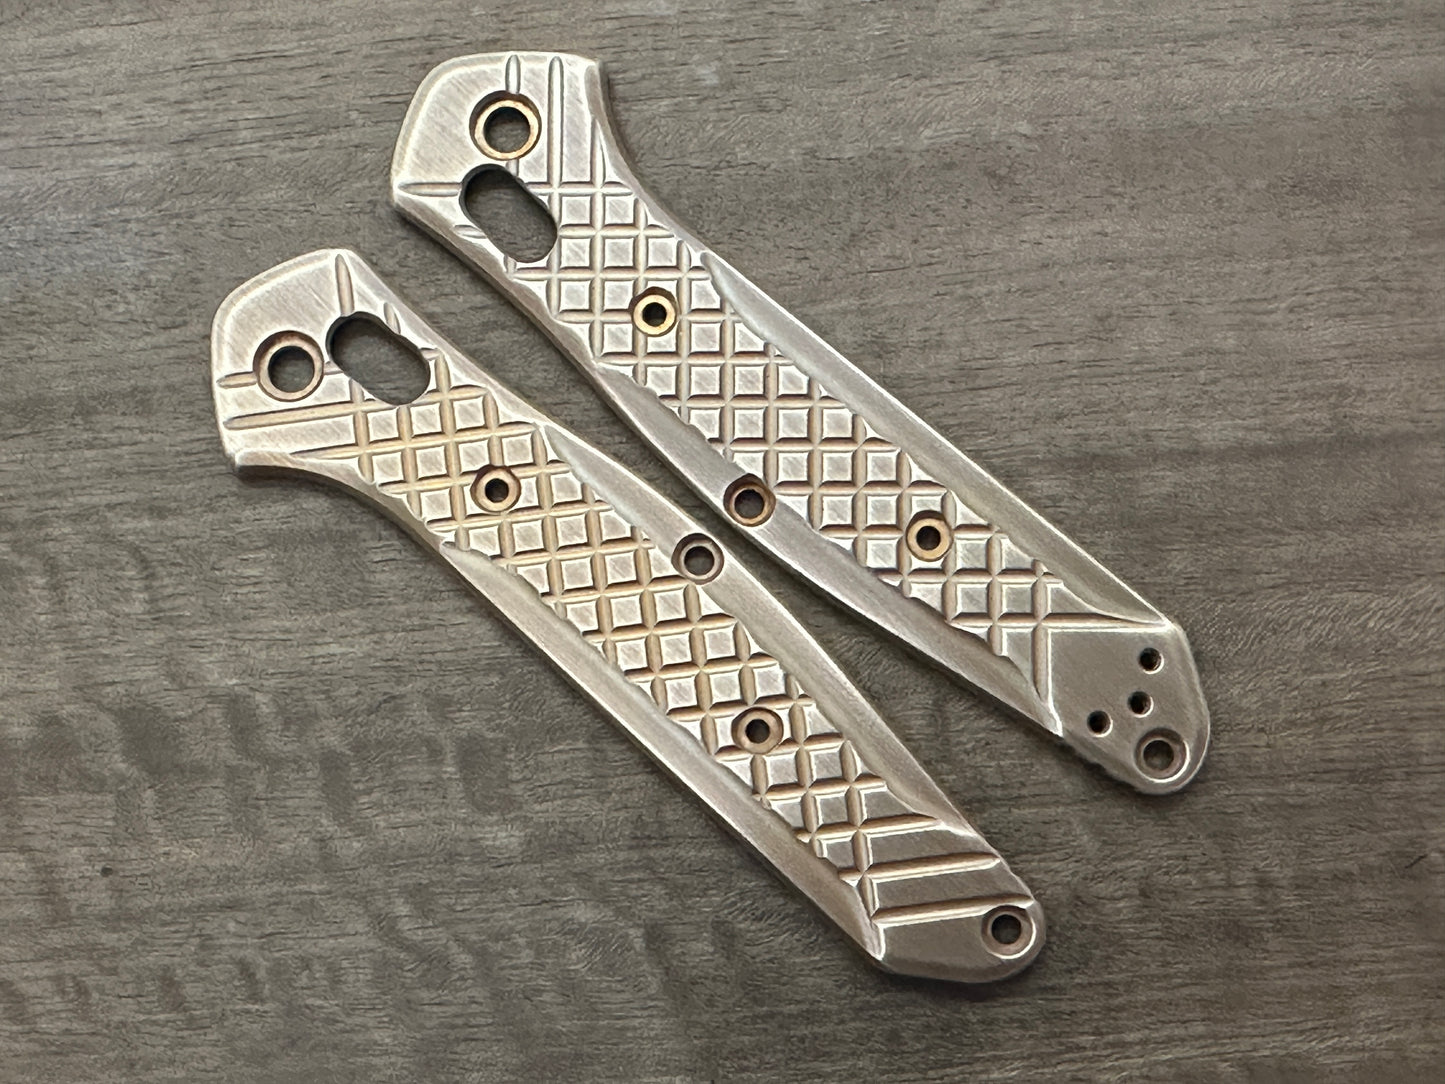 2-Tone Aged & Brushed FRAG milled Brass Scales for Benchmade 940 Osborne